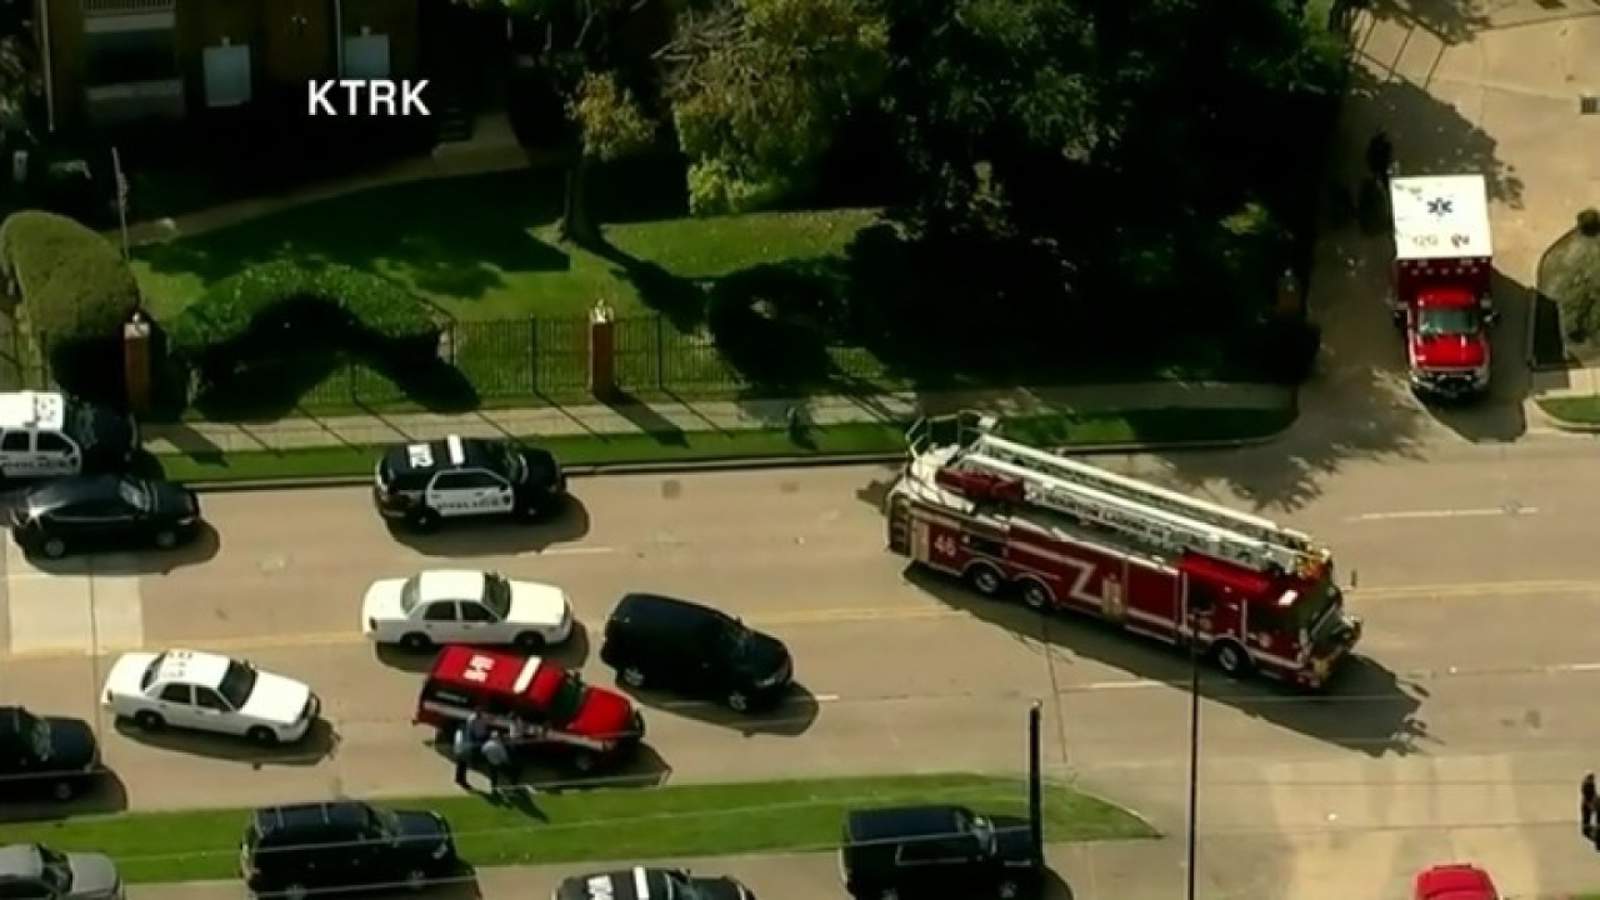 1 Houston police officer killed, another wounded; suspect shot and in custody